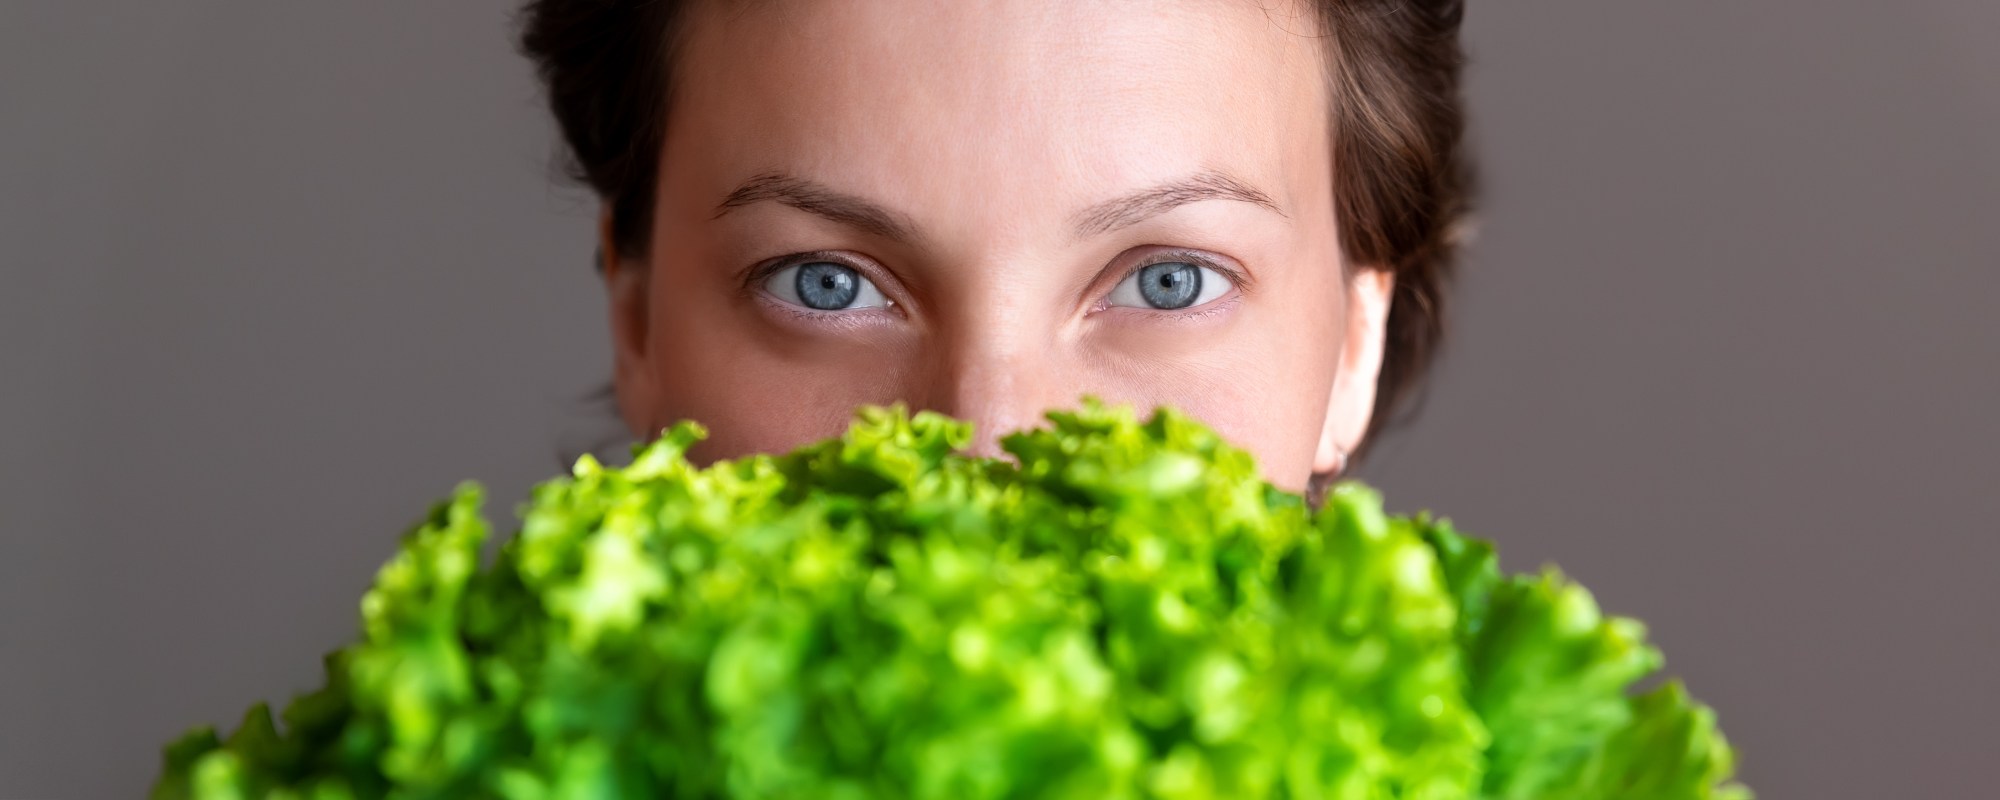 How Your Diet Can Impact Your Vision